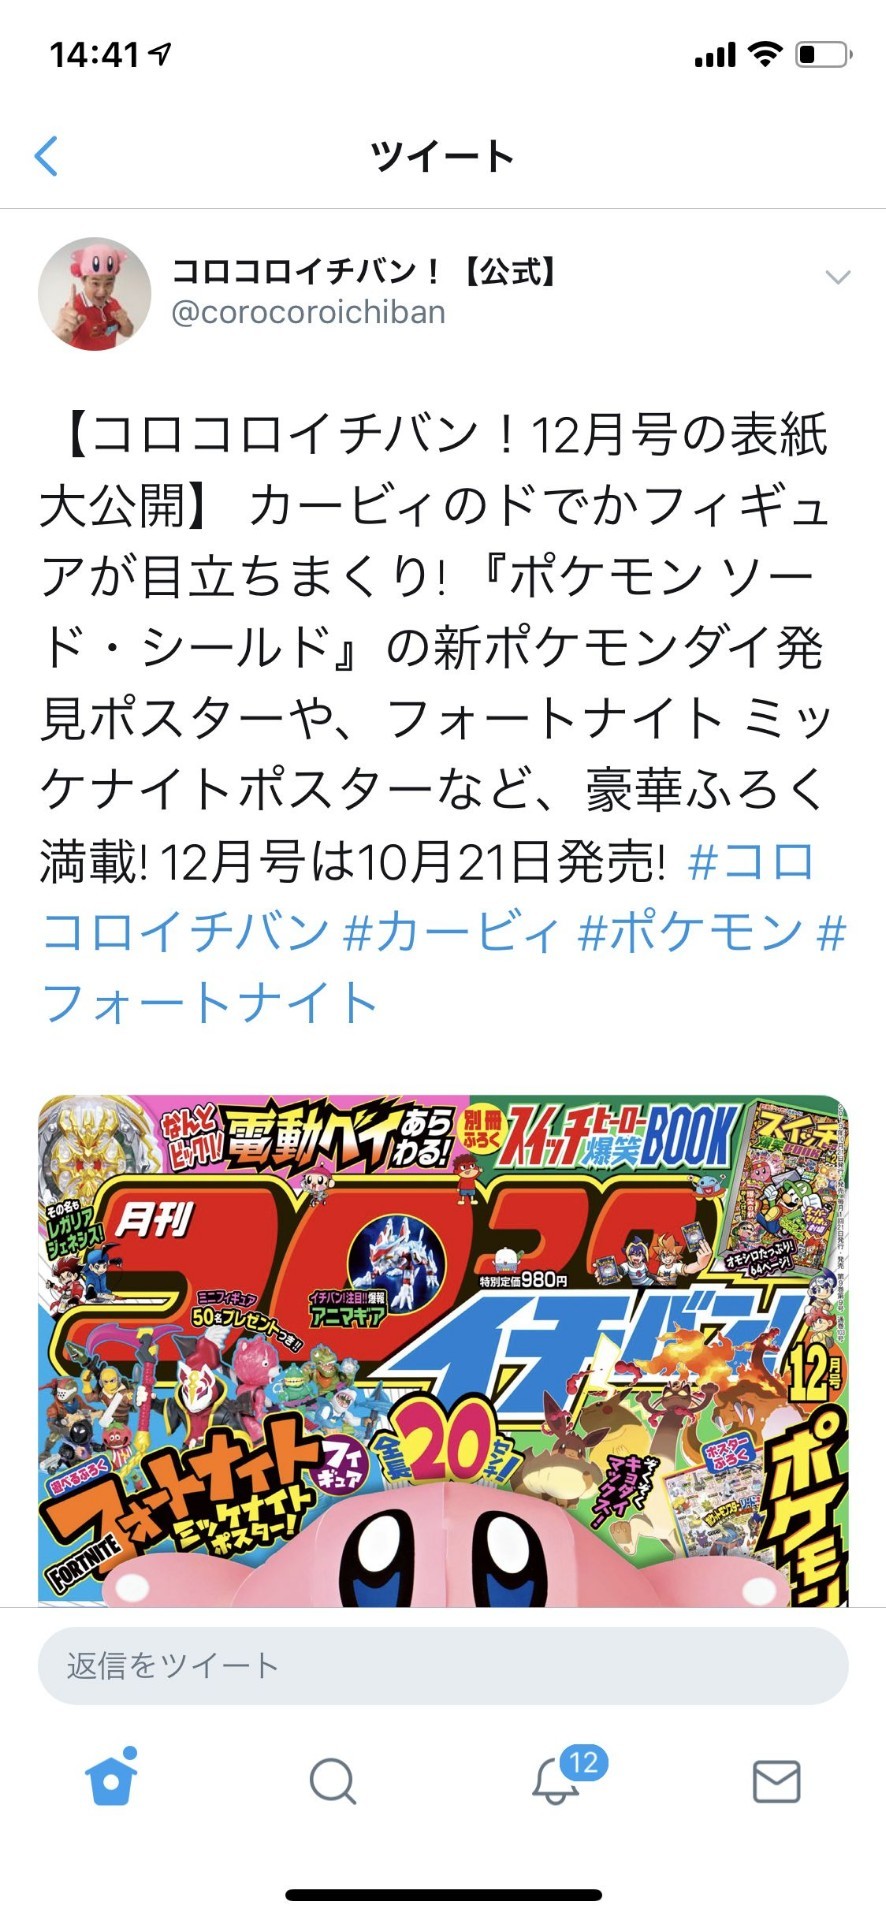 [Sad news] Pokemon sword shield, new information that was scheduled to be released today at 22:00 will be officially leaked to Korokoro Comic